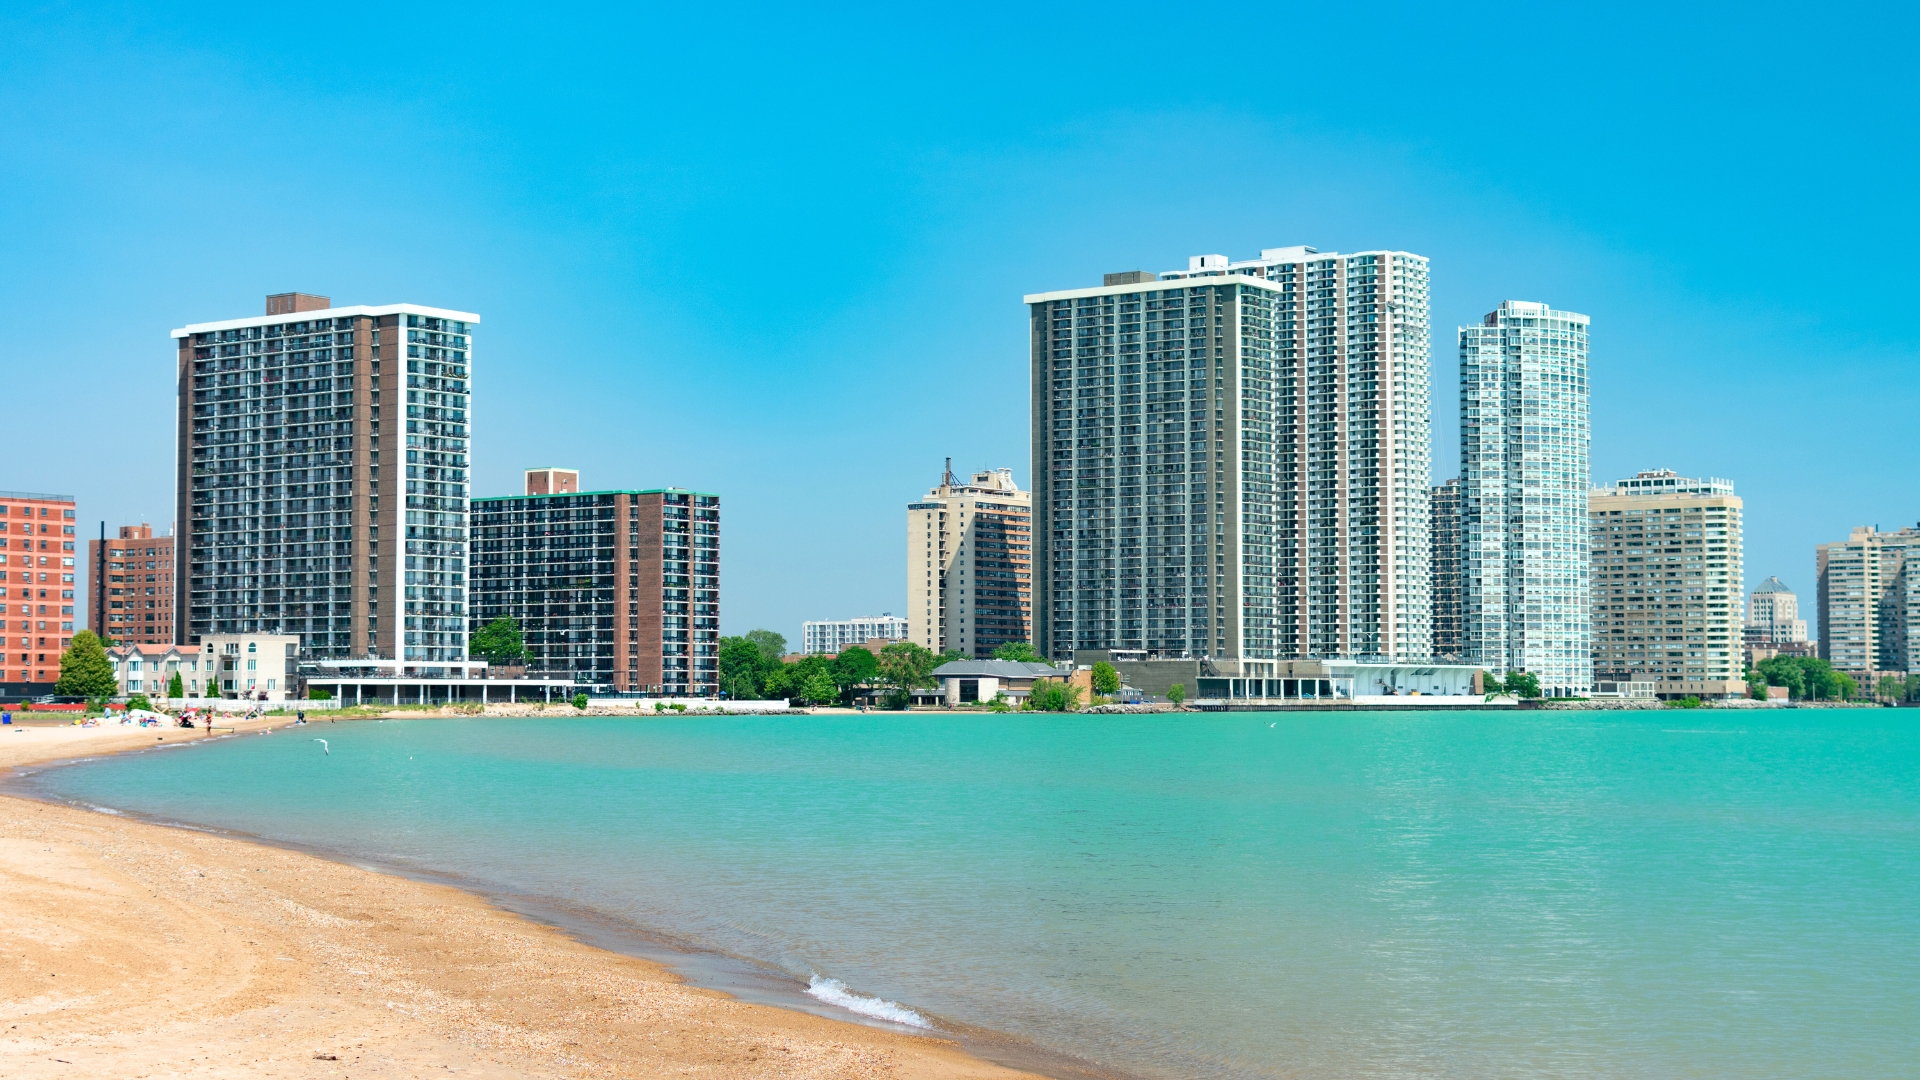 Residential buildings and skyscrapers along Lake Michigan in Edgewater, Chicago